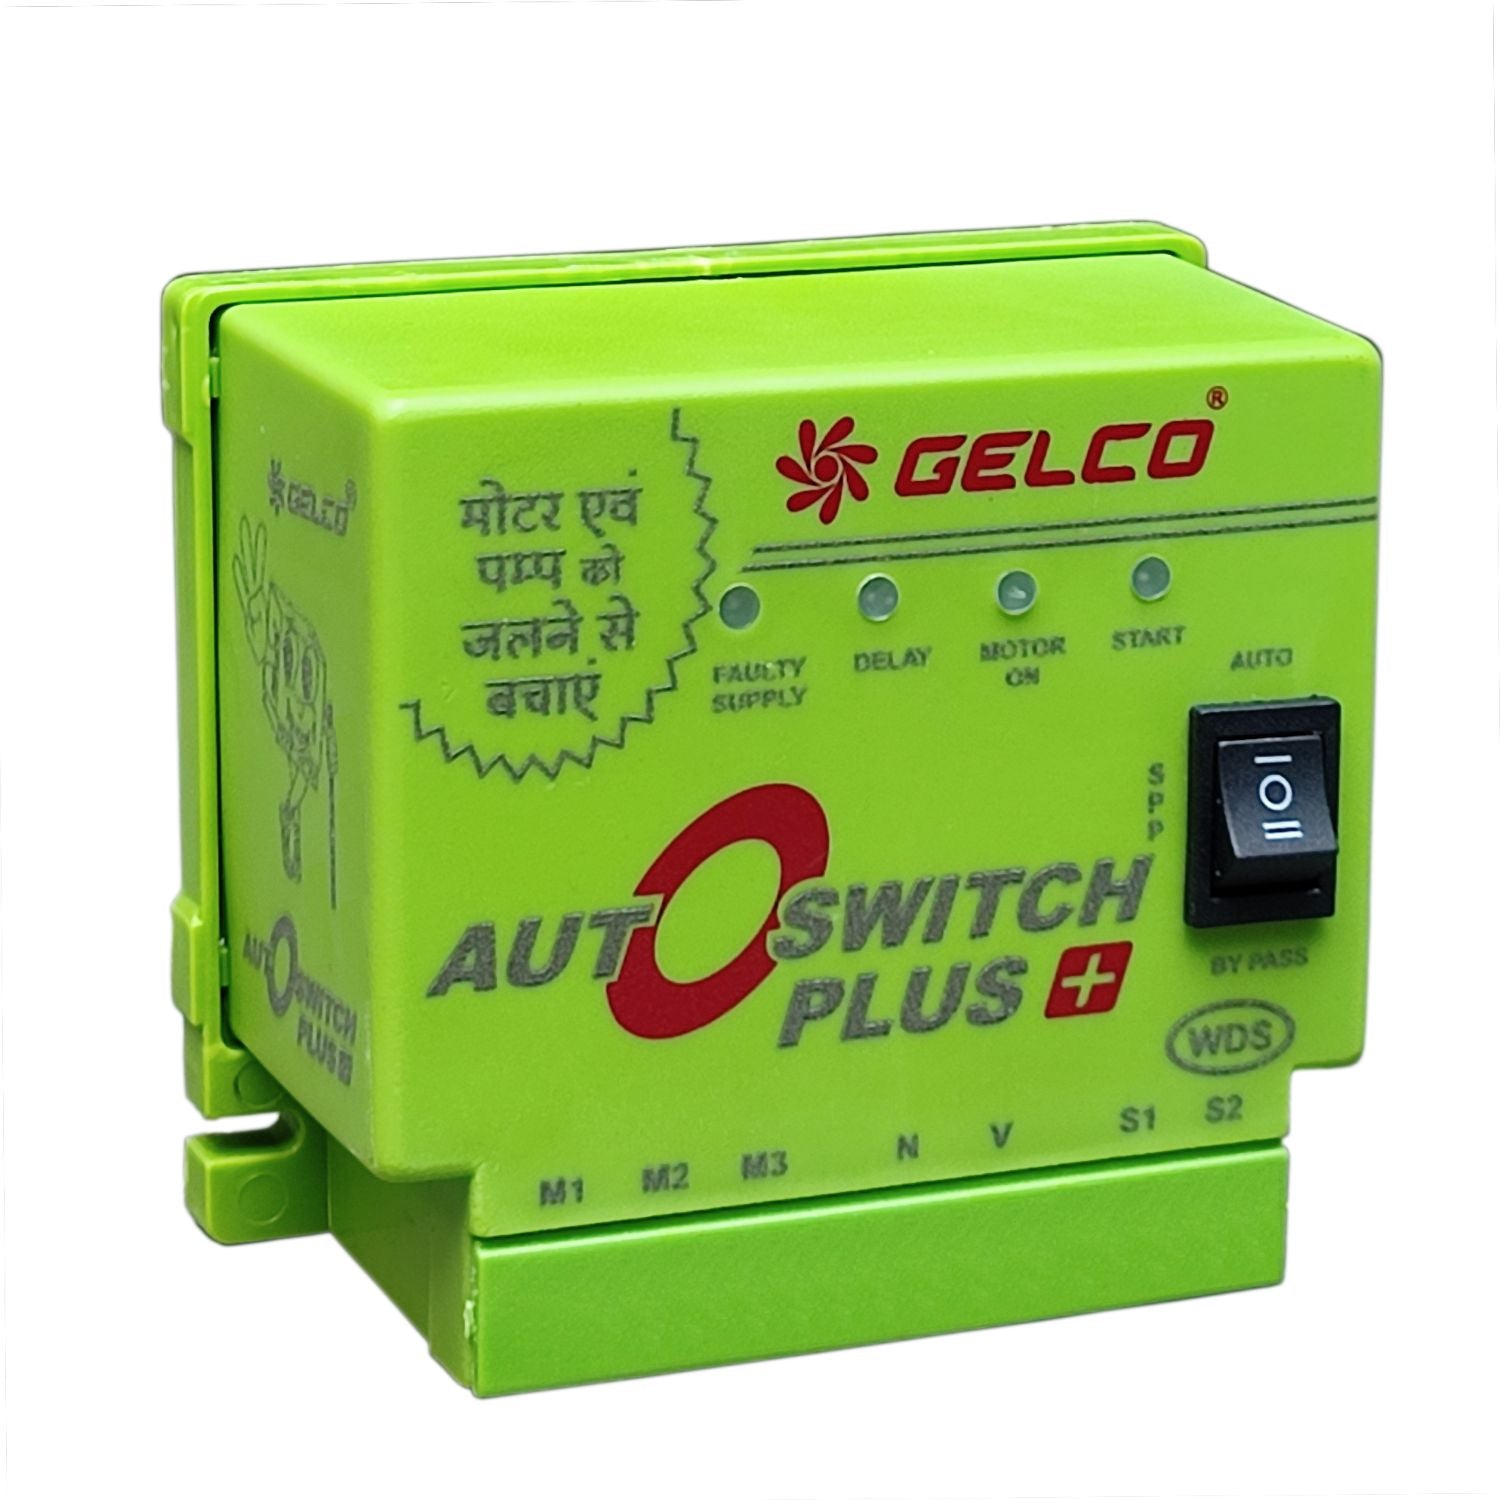 Auto Switch +, Efficiently operate Submersible, Monoset pumps, and mot –  Gelco Electronics Pvt. Ltd.